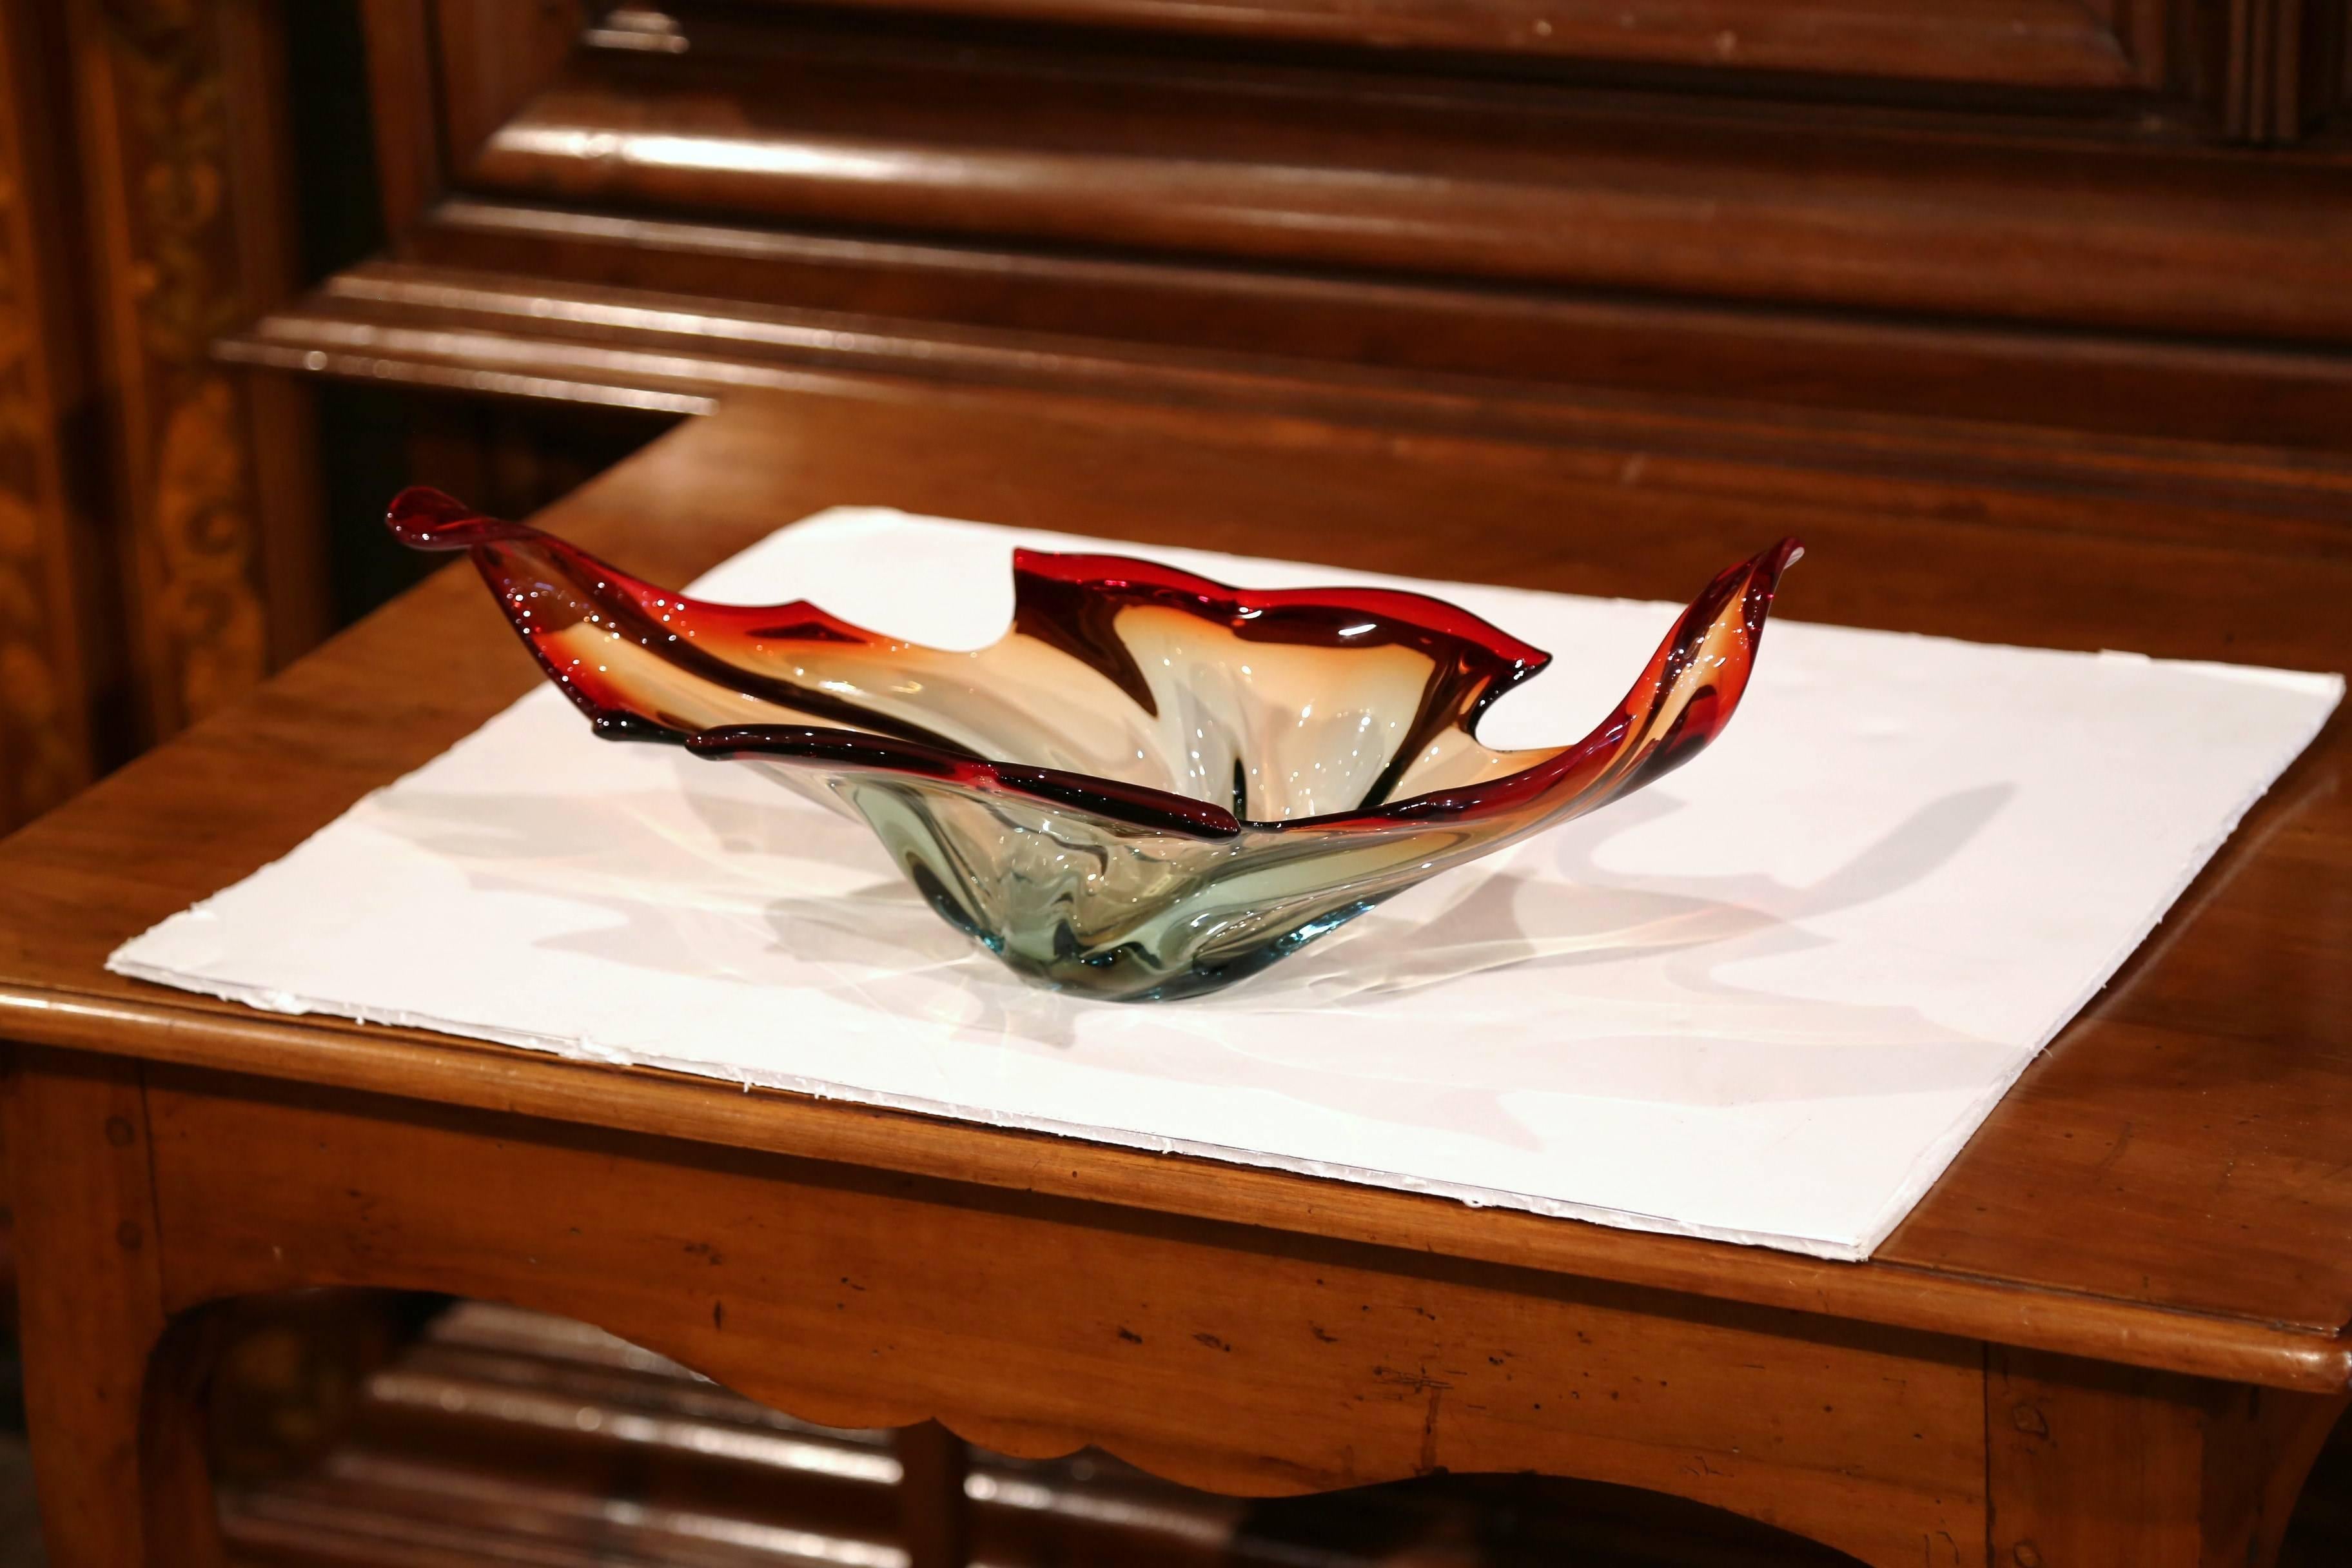 This elegant, handblown glass bowl was crafted in Italy, circa 1950. The vintage, red centre piece from Murano features a pulled feathered technique with an intricate curl design. The traditional large vase is in excellent condition with wonderful,